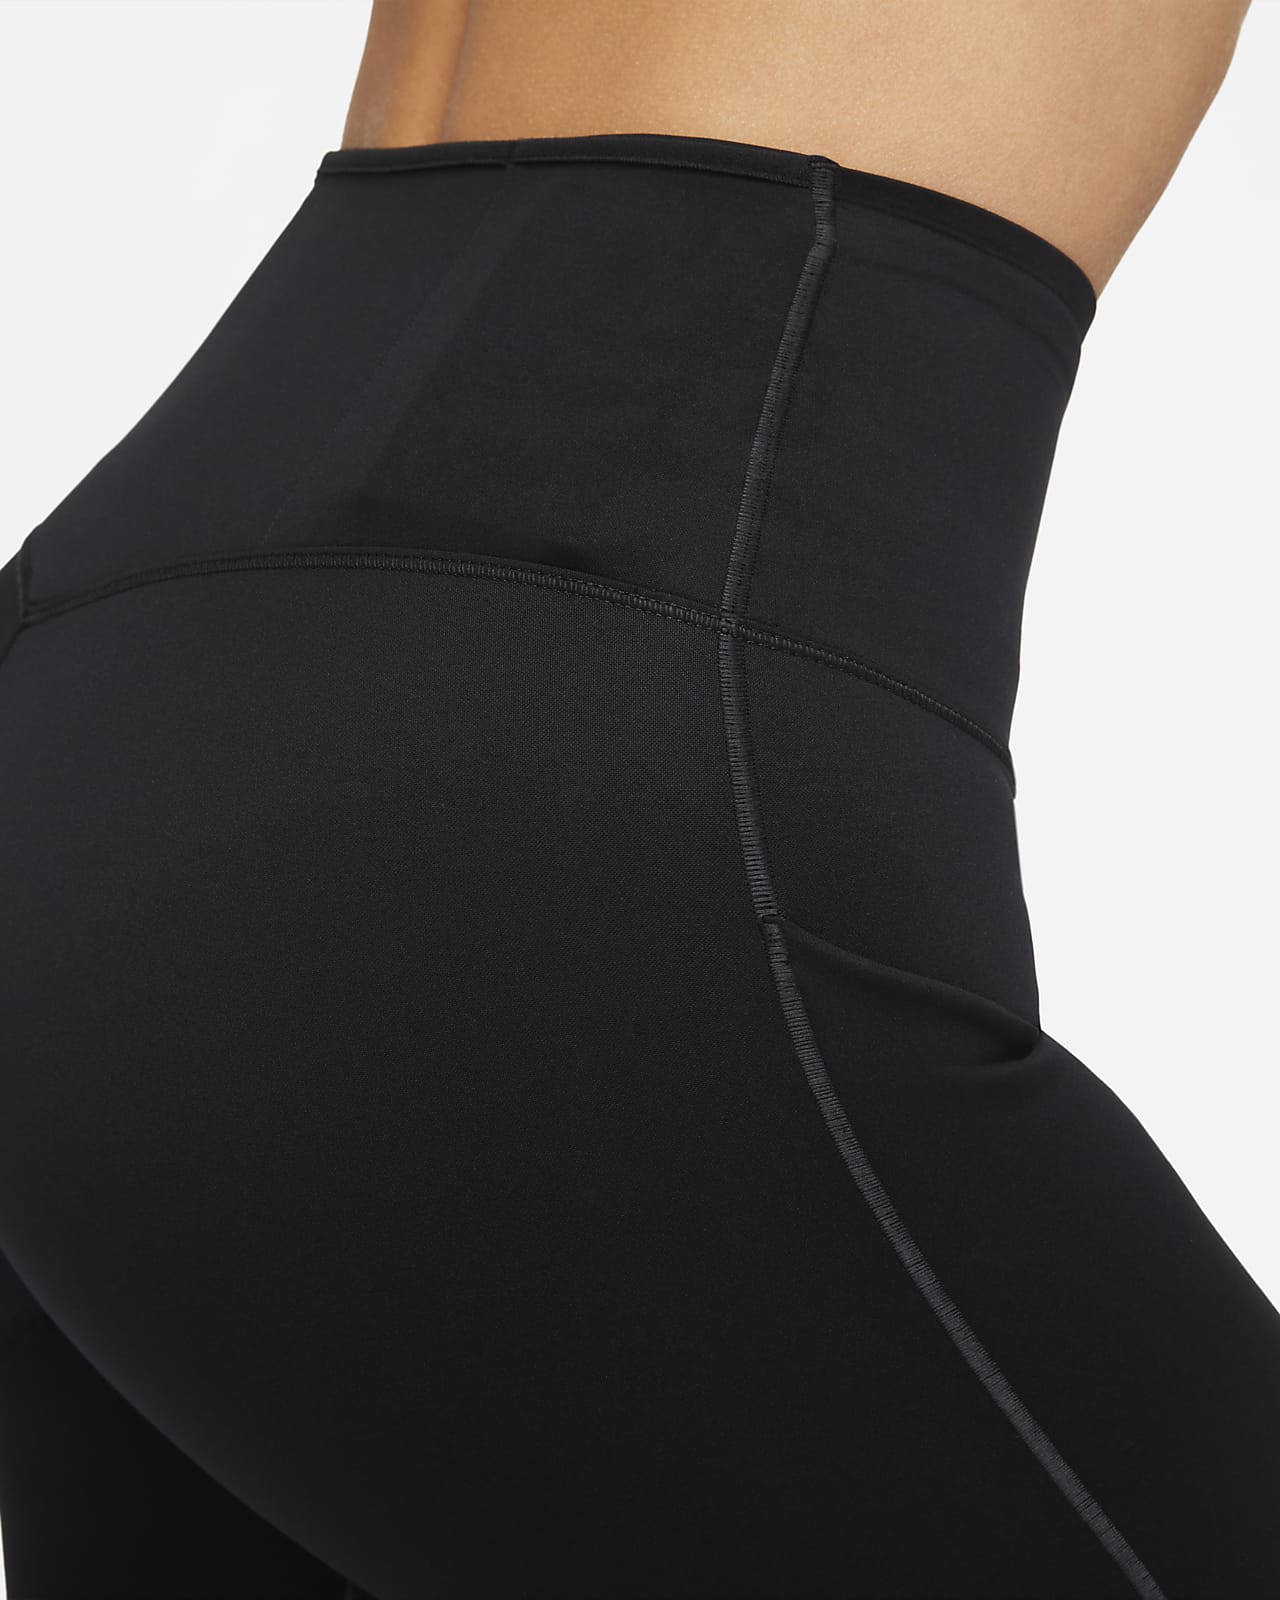 Nike Dri-Fit Black Filament Running Capris Tights Women's Size Small S -  $20 - From Taylor